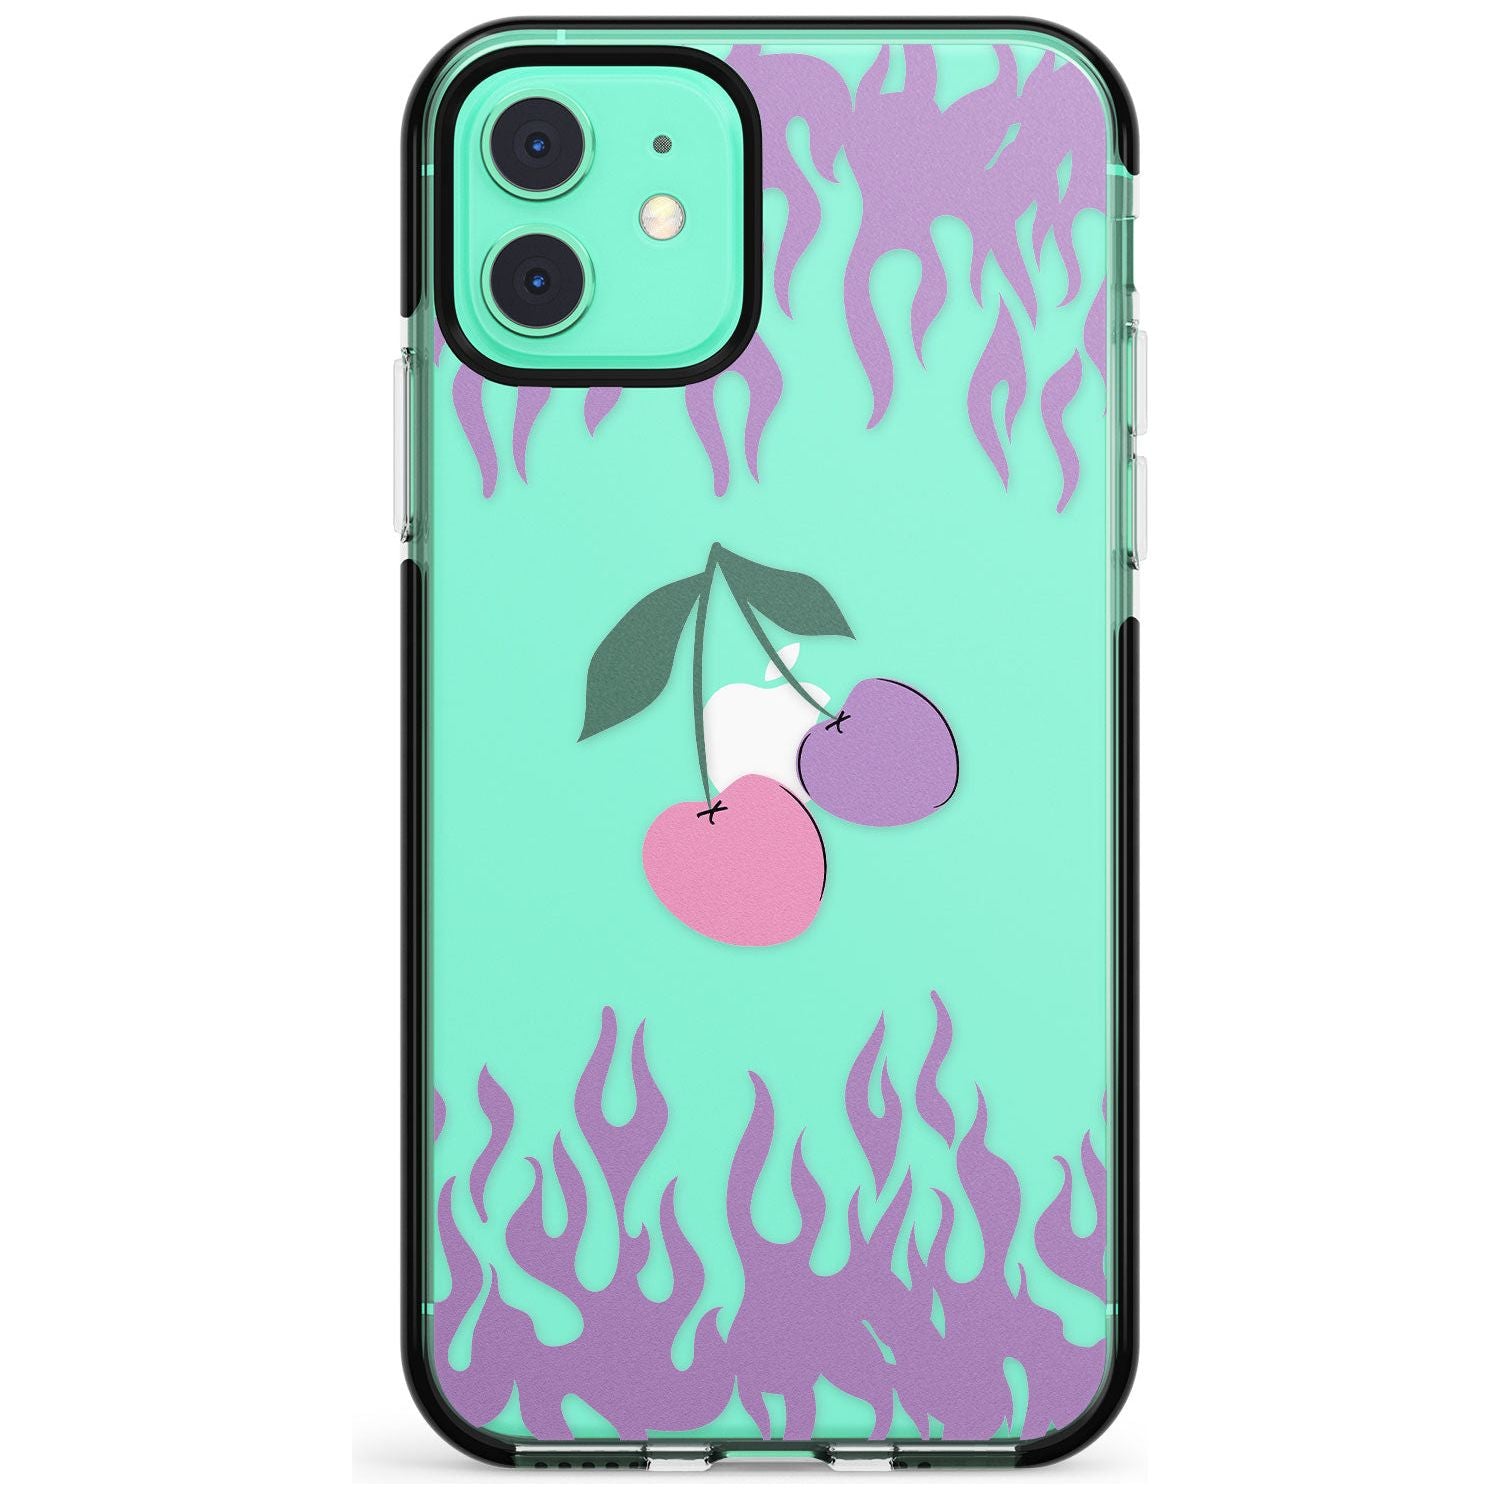 Cherries n' Flames Black Impact Phone Case for iPhone 11 Pro Max